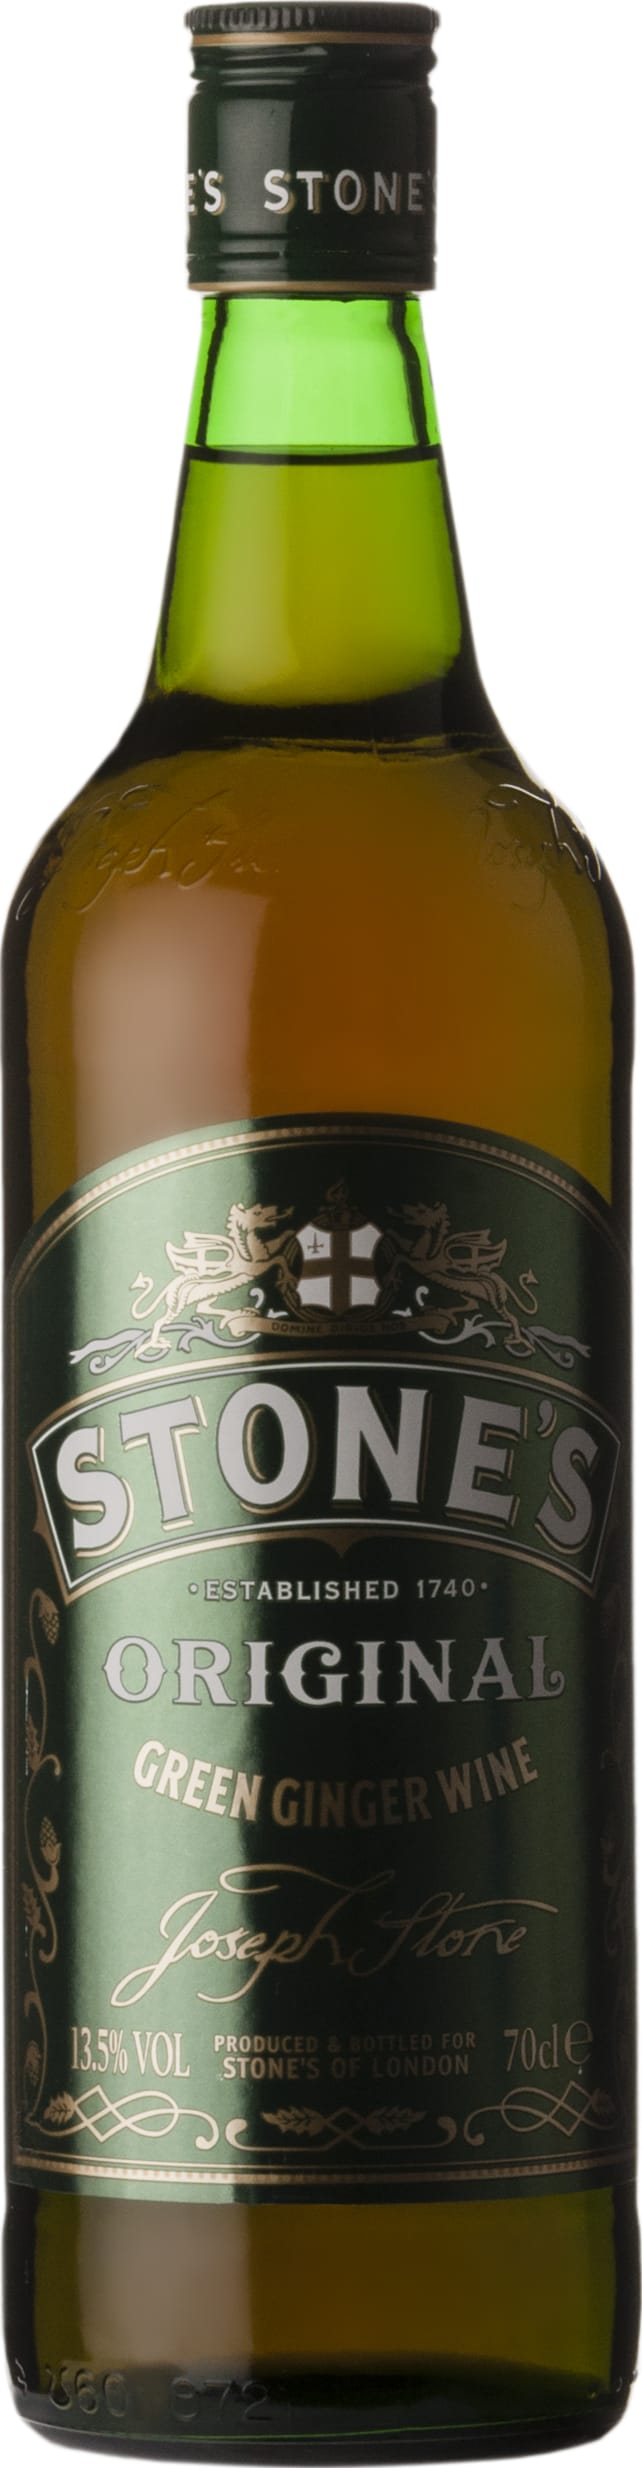 Stone's Ginger Wine 70cl NV - Buy Stone's Wines from GREAT WINES DIRECT wine shop